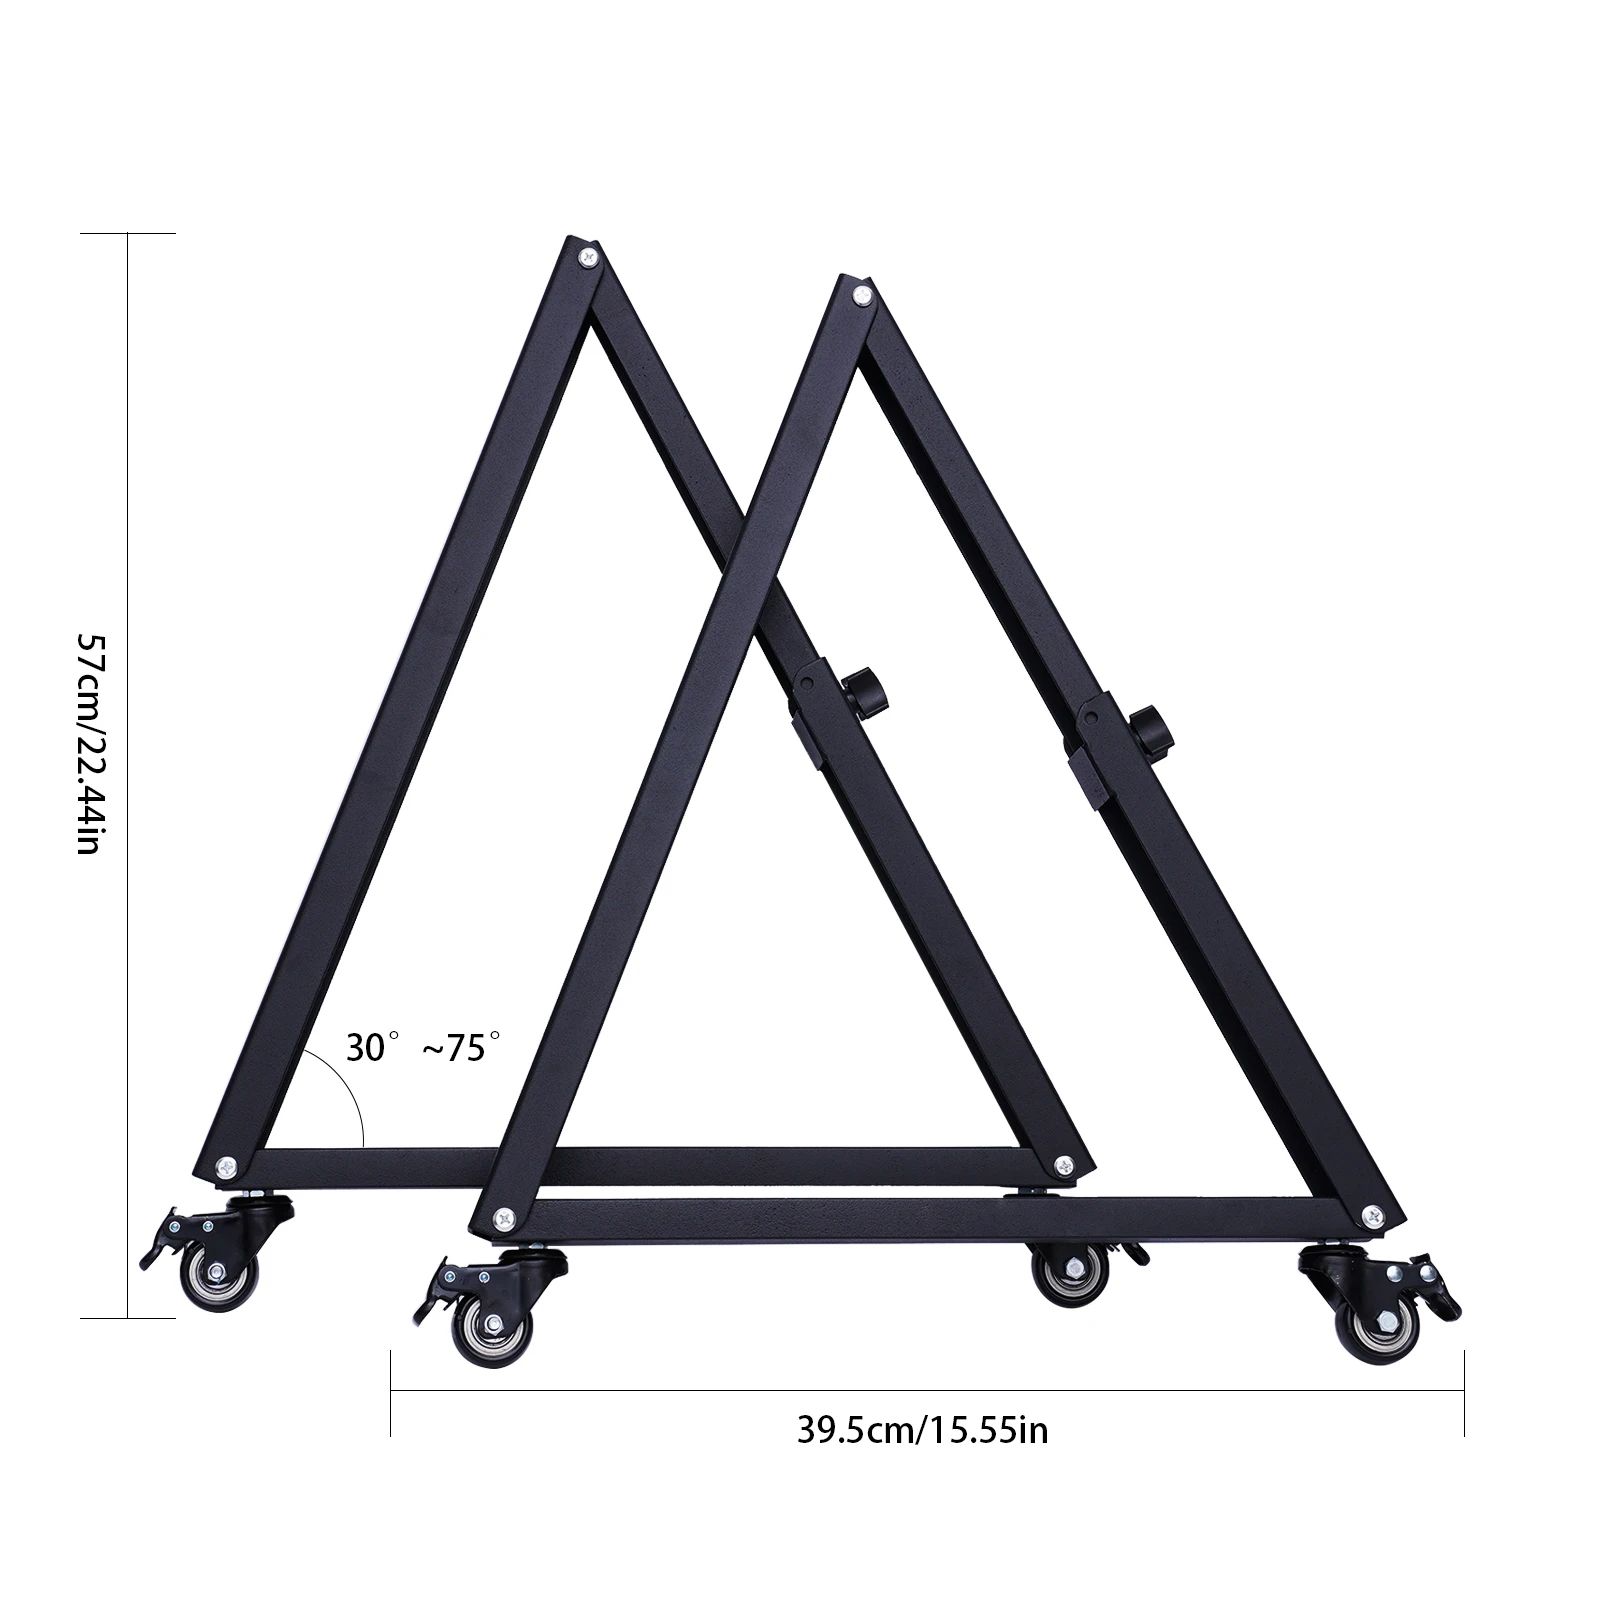 19 55In 30° 75° Low Height Adjustable Mobile Tv Stand Monitor Floor Stand  Mount Universal Flat Screen Rolling Tv Cart W/Wheels For Foldable Portable Adjustable Tv Stands (Photo 8 of 15)